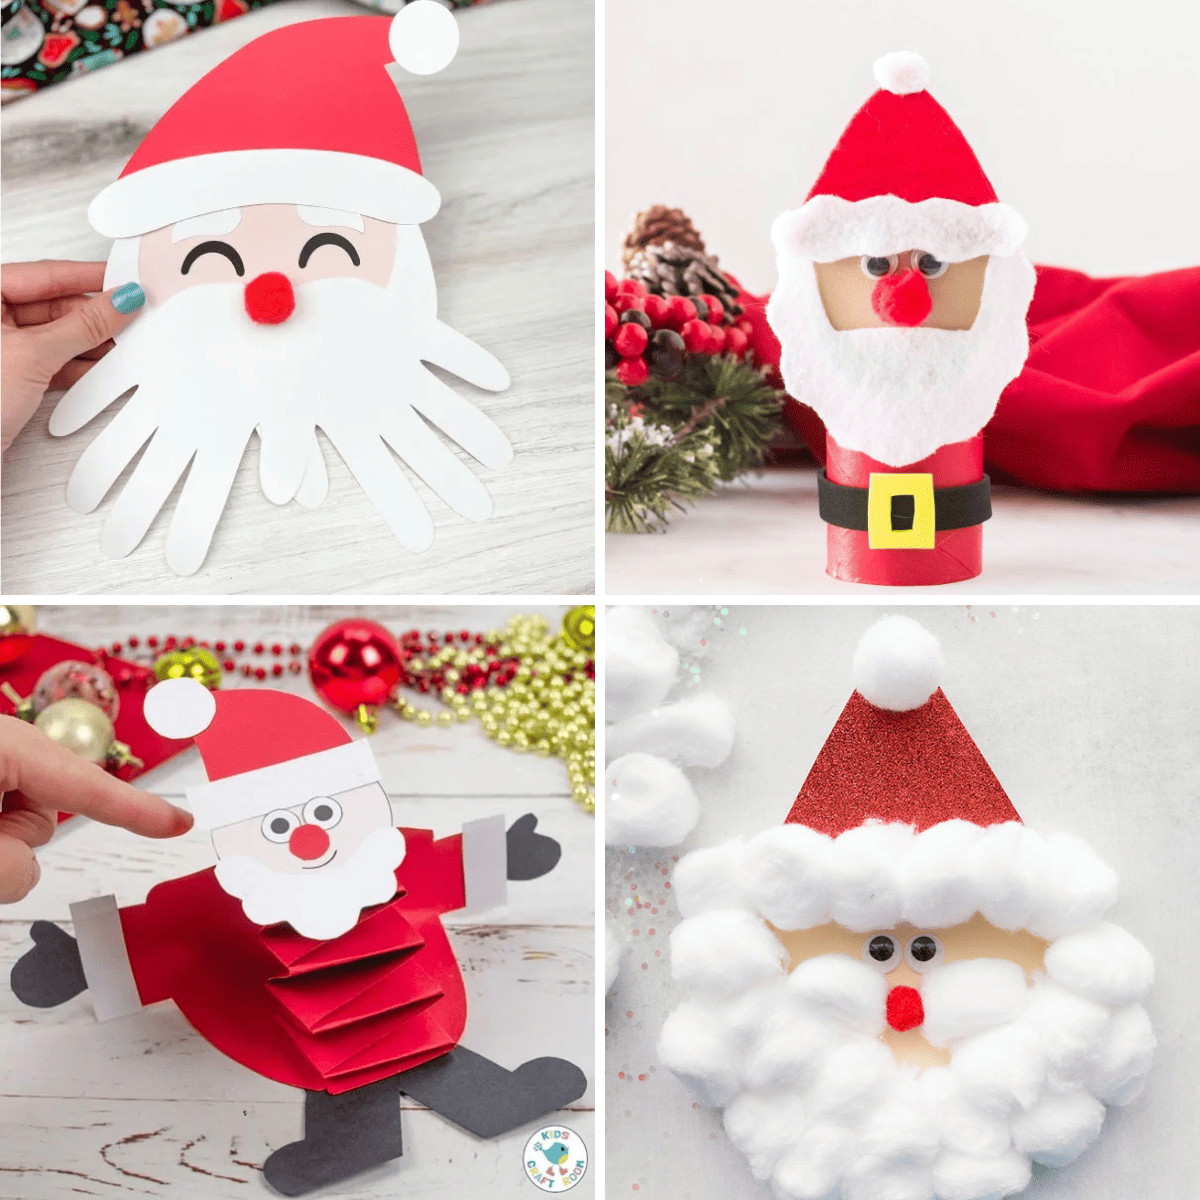 20 Simple Santa Crafts for Kids - Prudent Penny Pincher